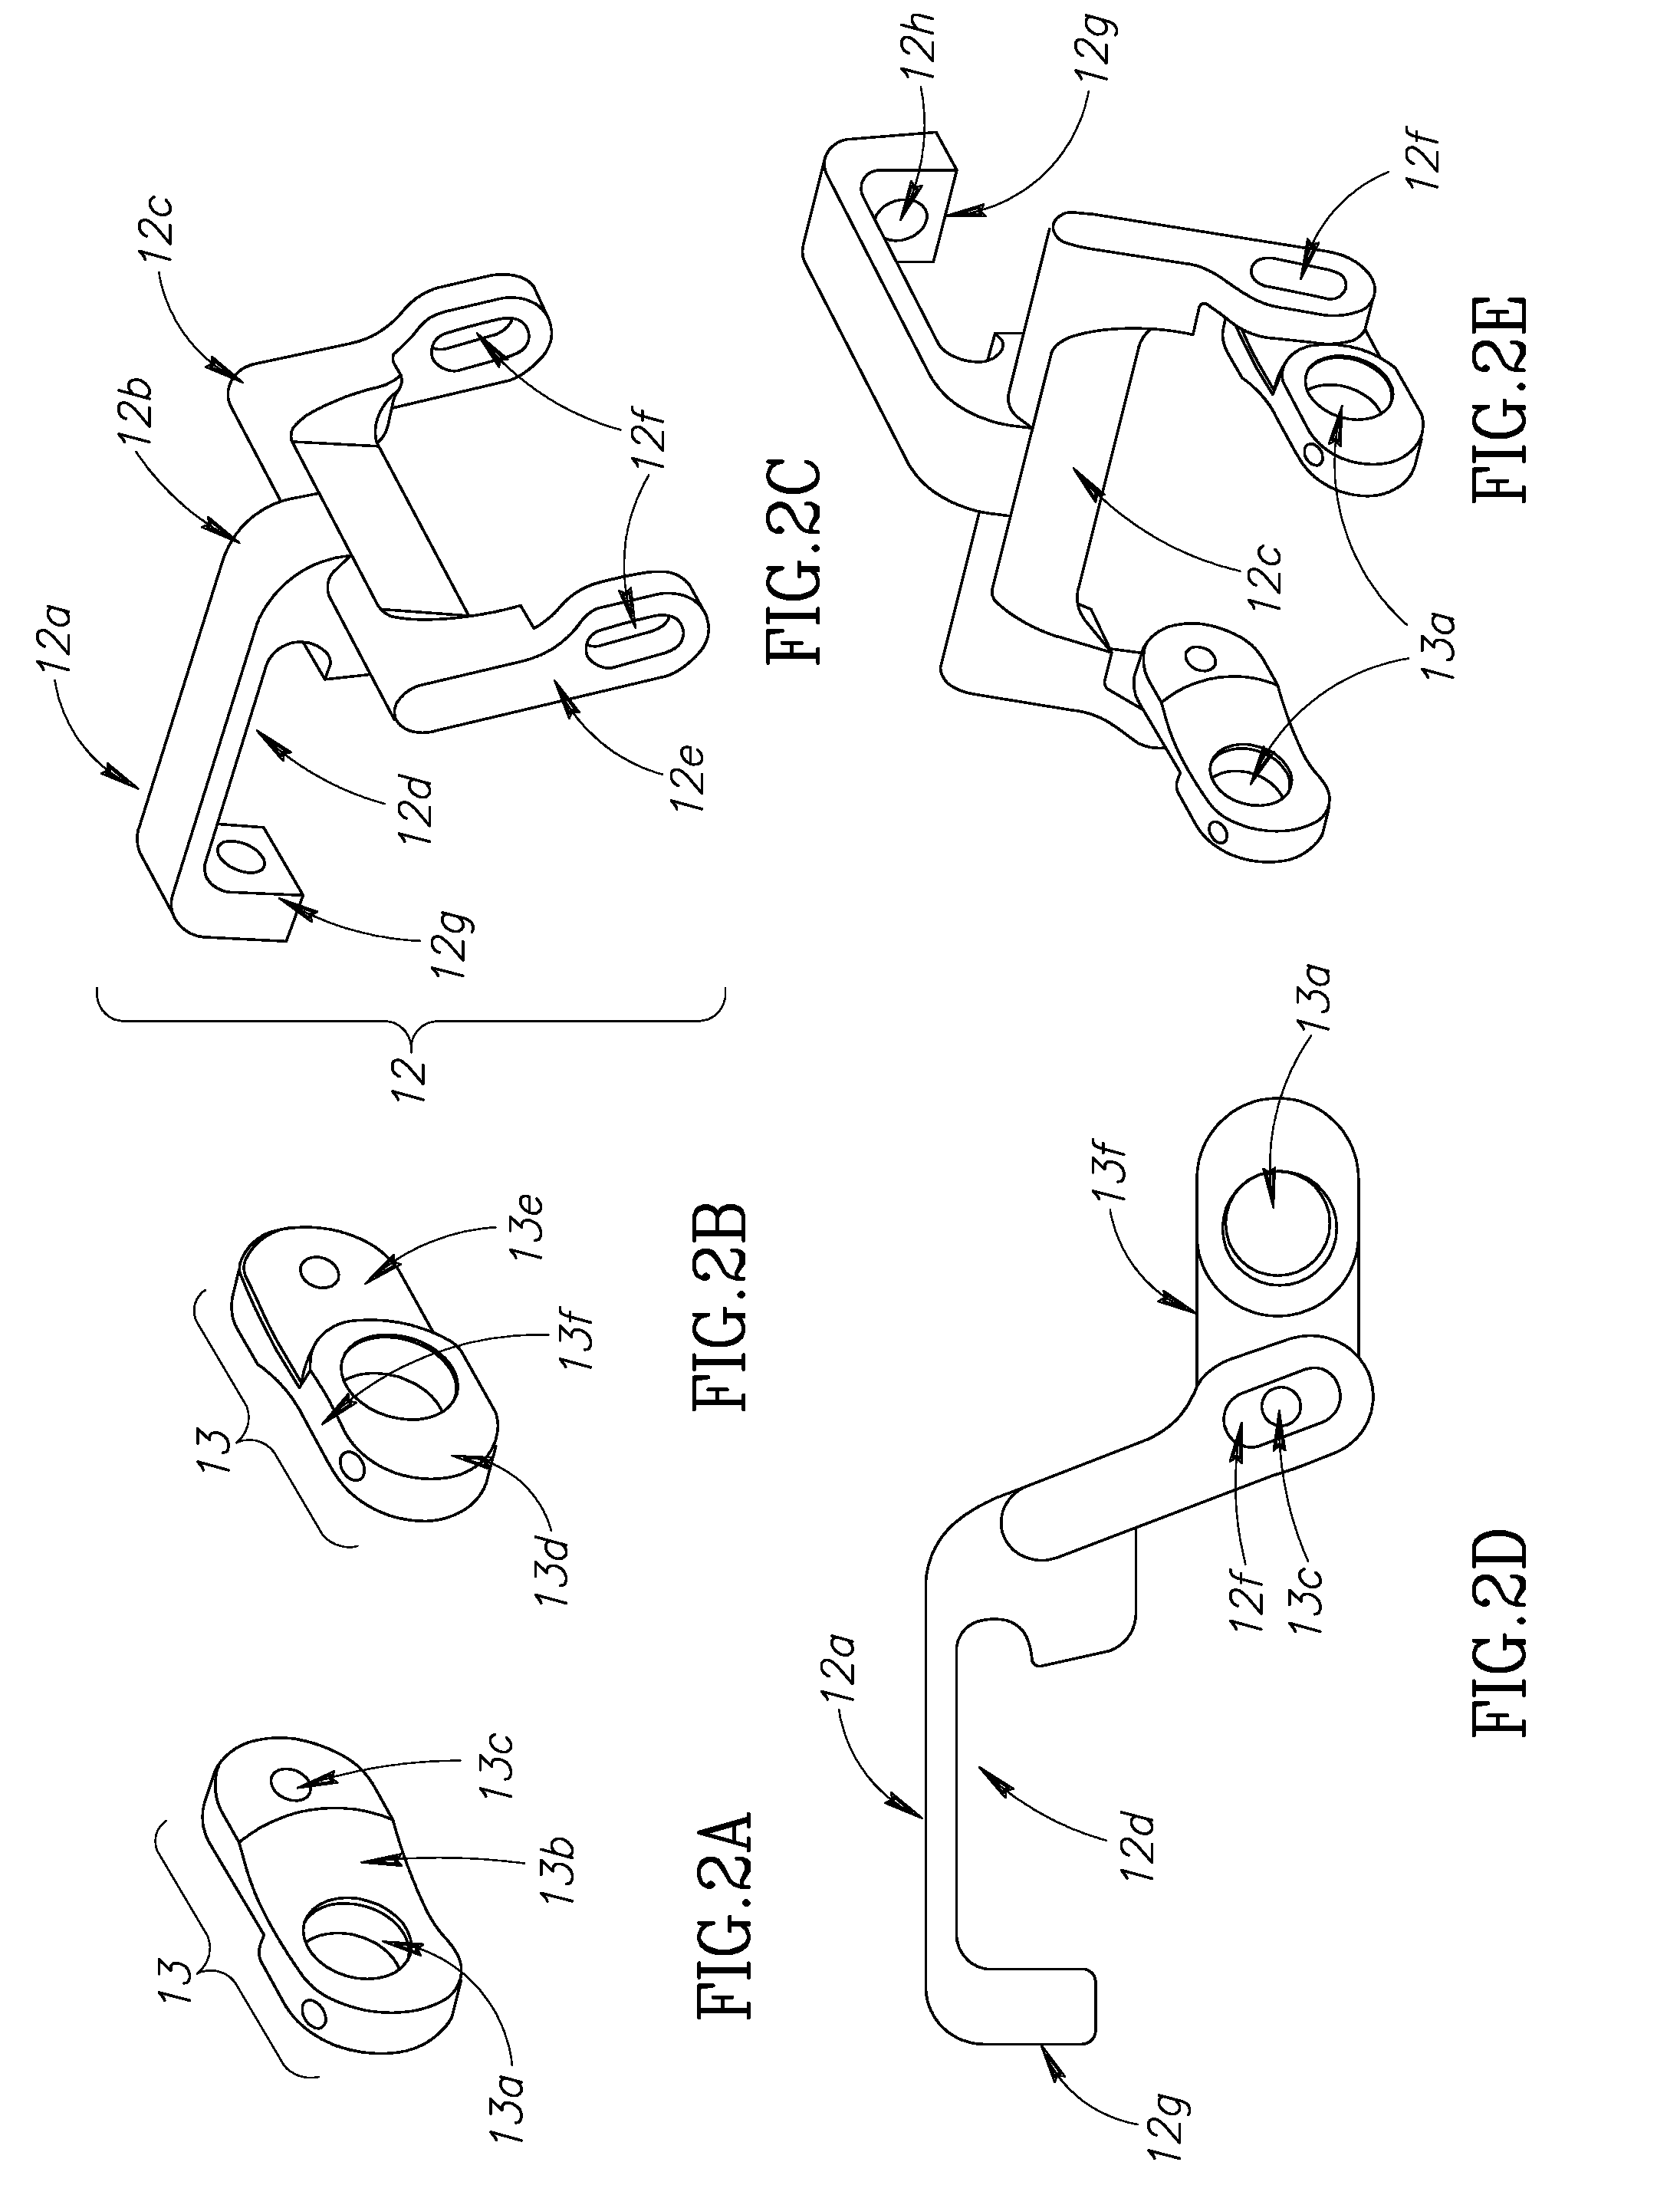 A precision surgical guidance tool system and method for implementing dental implants